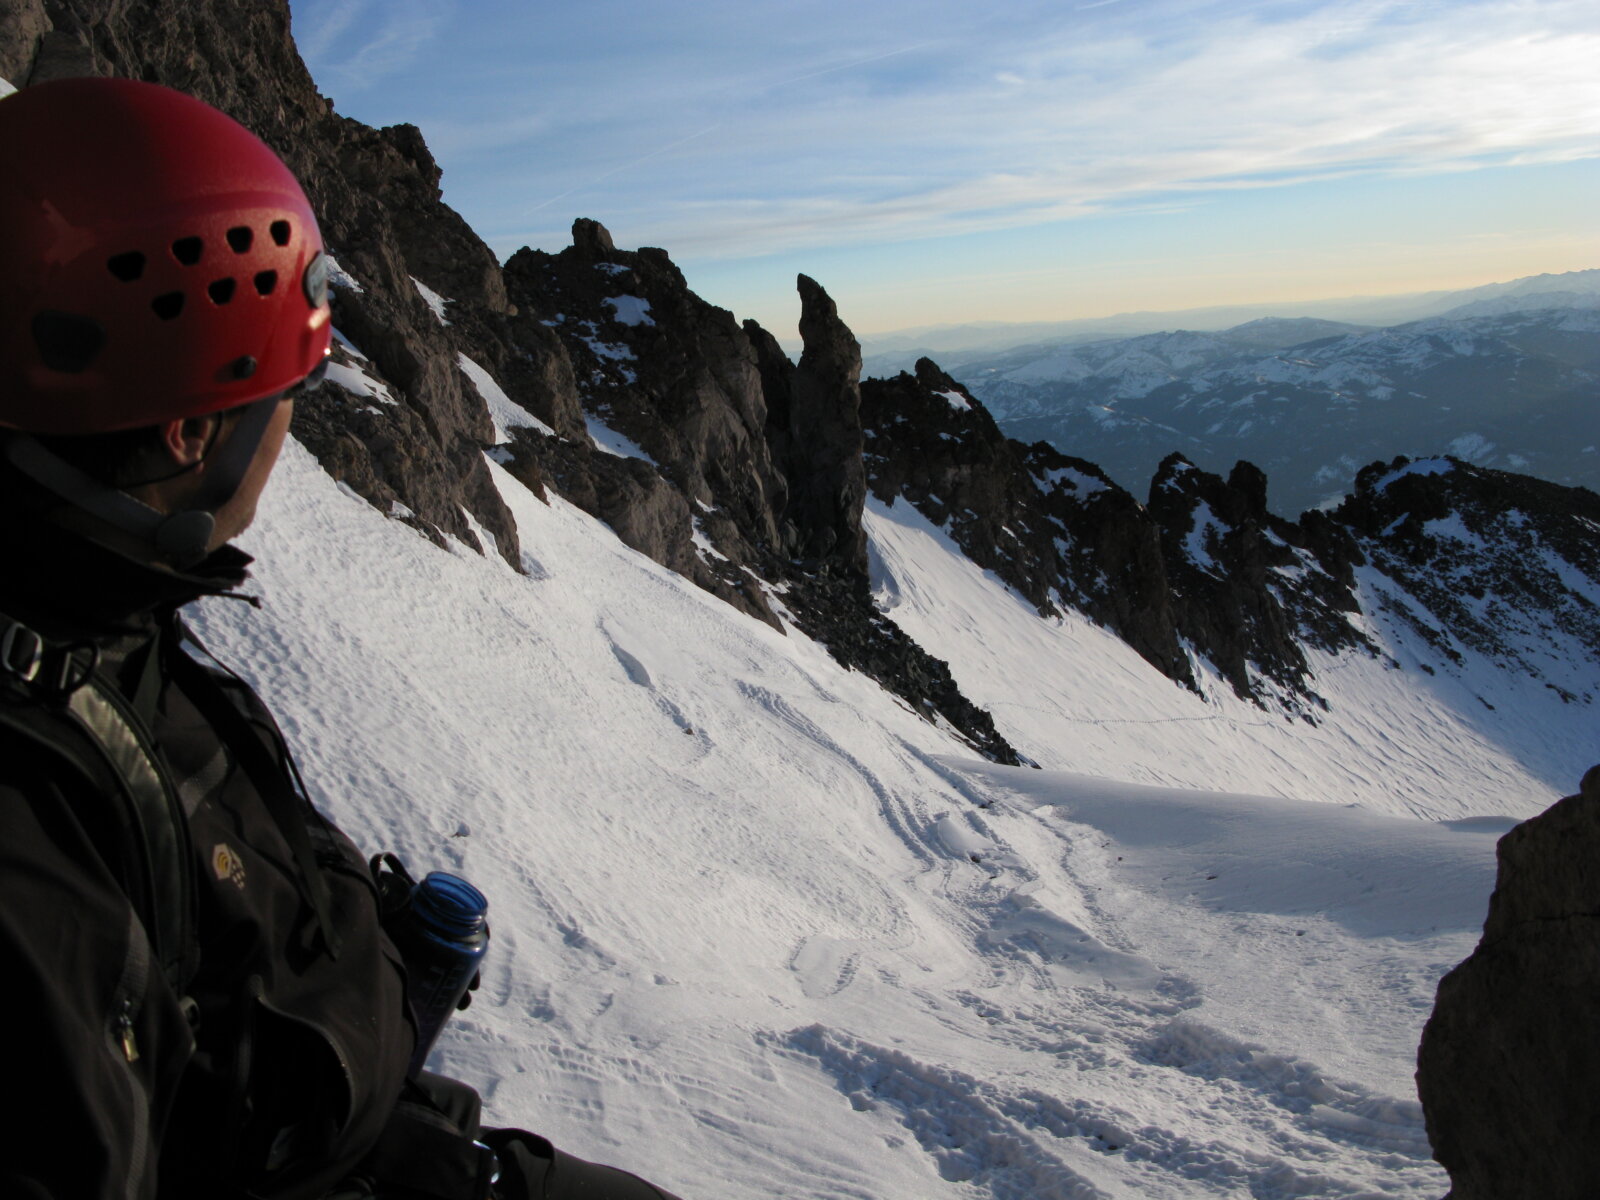 A mountaineering client looks out at Avalanche Gulch on Mount Shasta during a guided trip with Alpenglow Expeditions